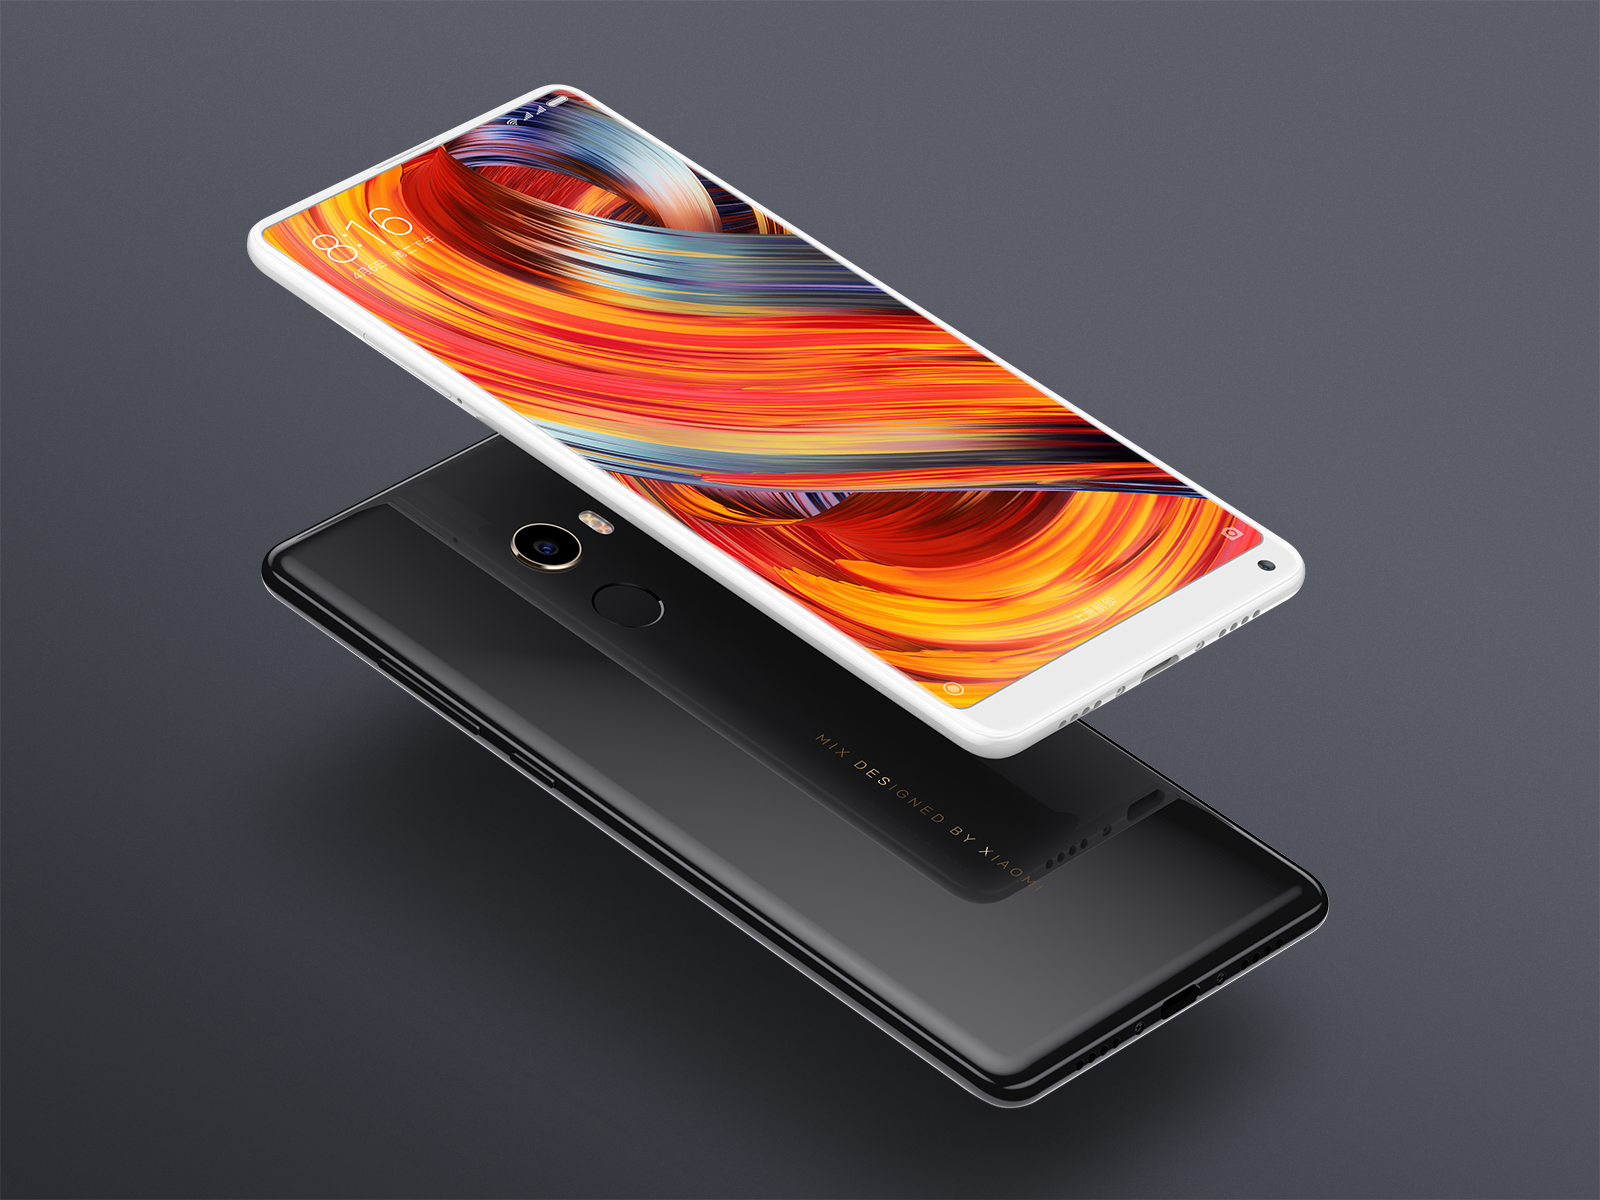 Xiaomi Mi Mix 2 coming soon to India: Expected pricing and availability